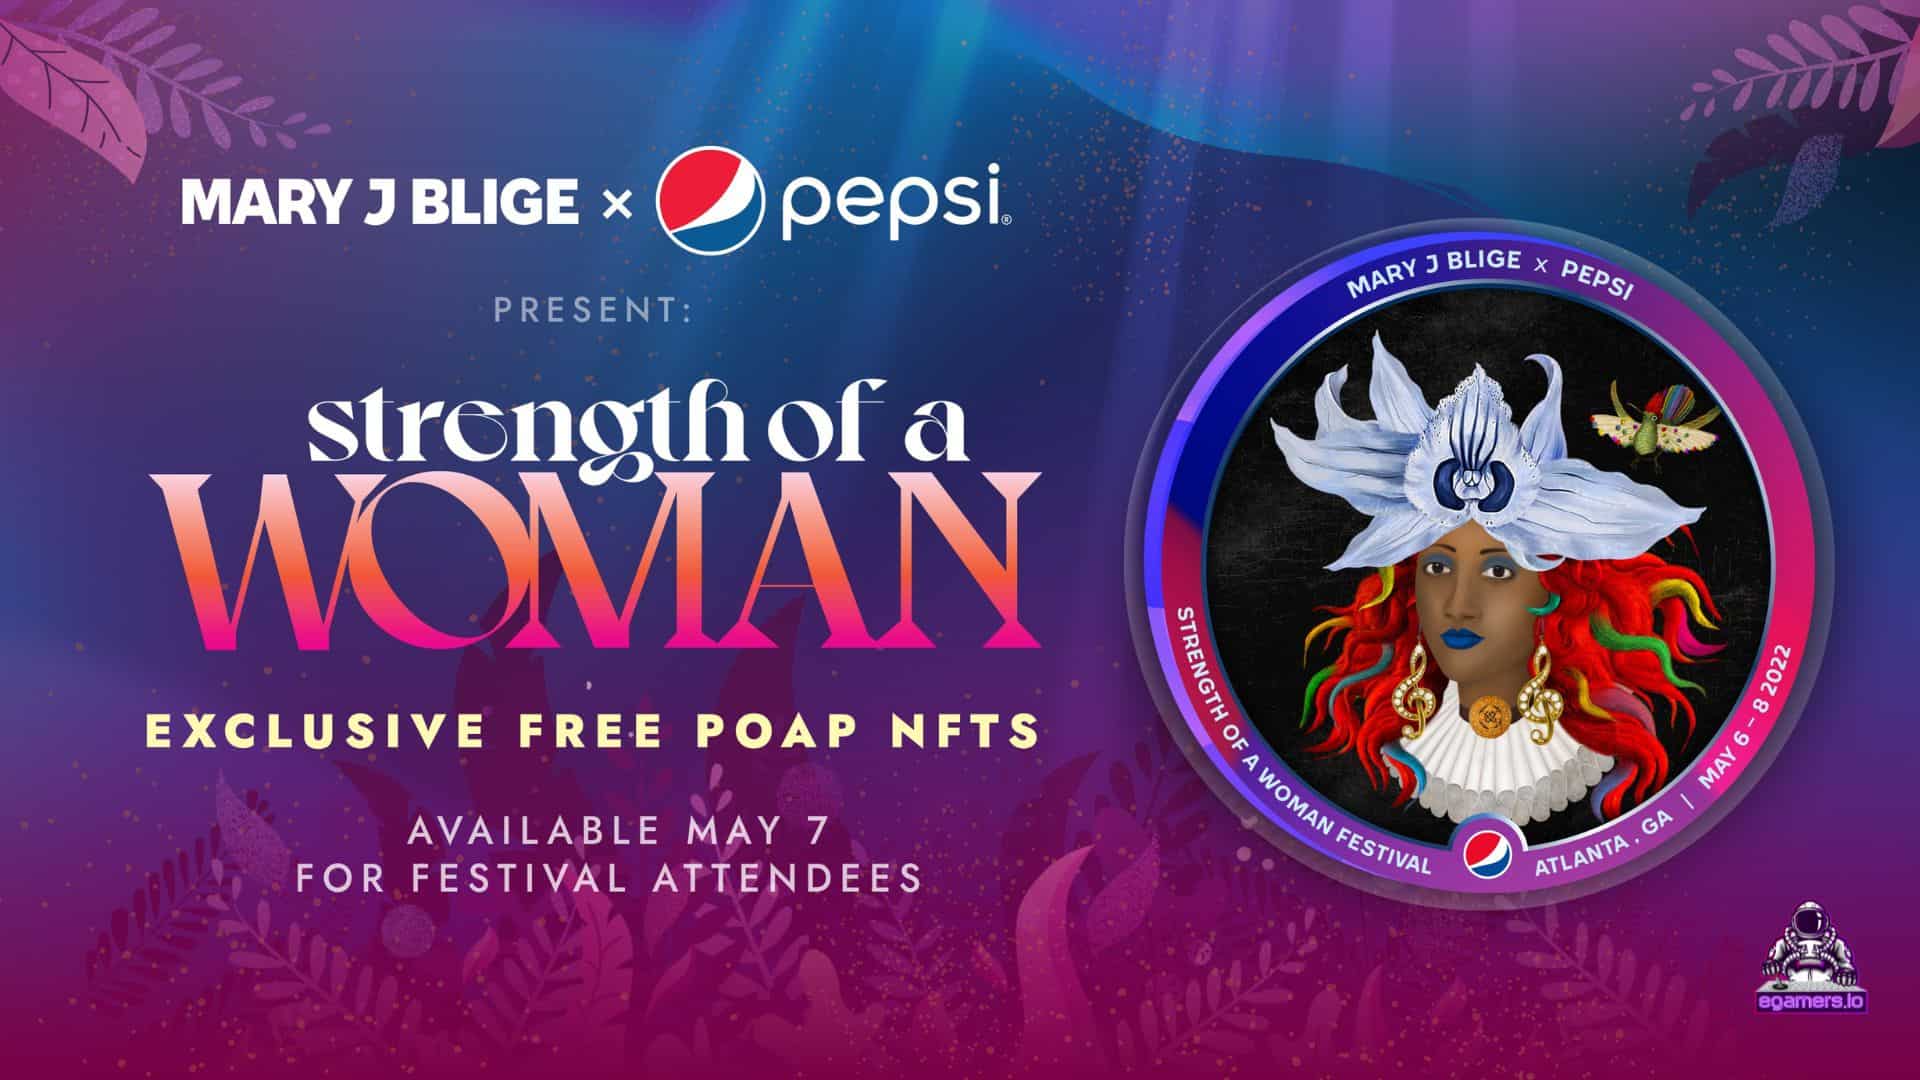 Pepsi x Carla Hall Give Away FREE POAP NFTs to Festival Attendees